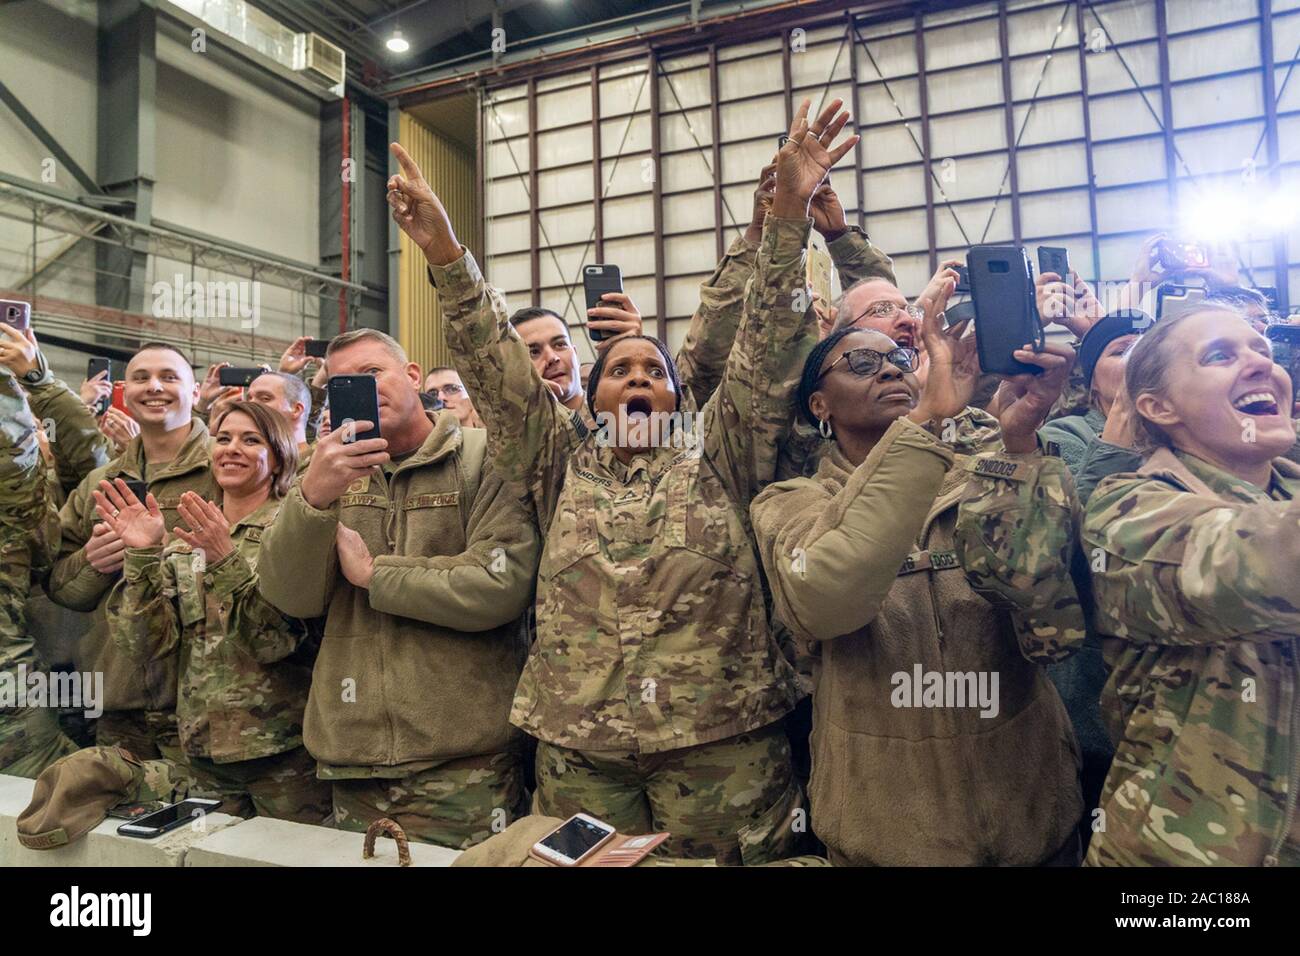 Afghanistan. 28th Nov, 2019. United States service members deployed to Bagram Airfield in Afghanistan applaud as President Donald J. Trump delivers remarks Thursday, Nov. 28, 2019, during a surprise Thanksgiving visit People: President Donald Trump Credit: Storms Media Group/Alamy Live News Stock Photo